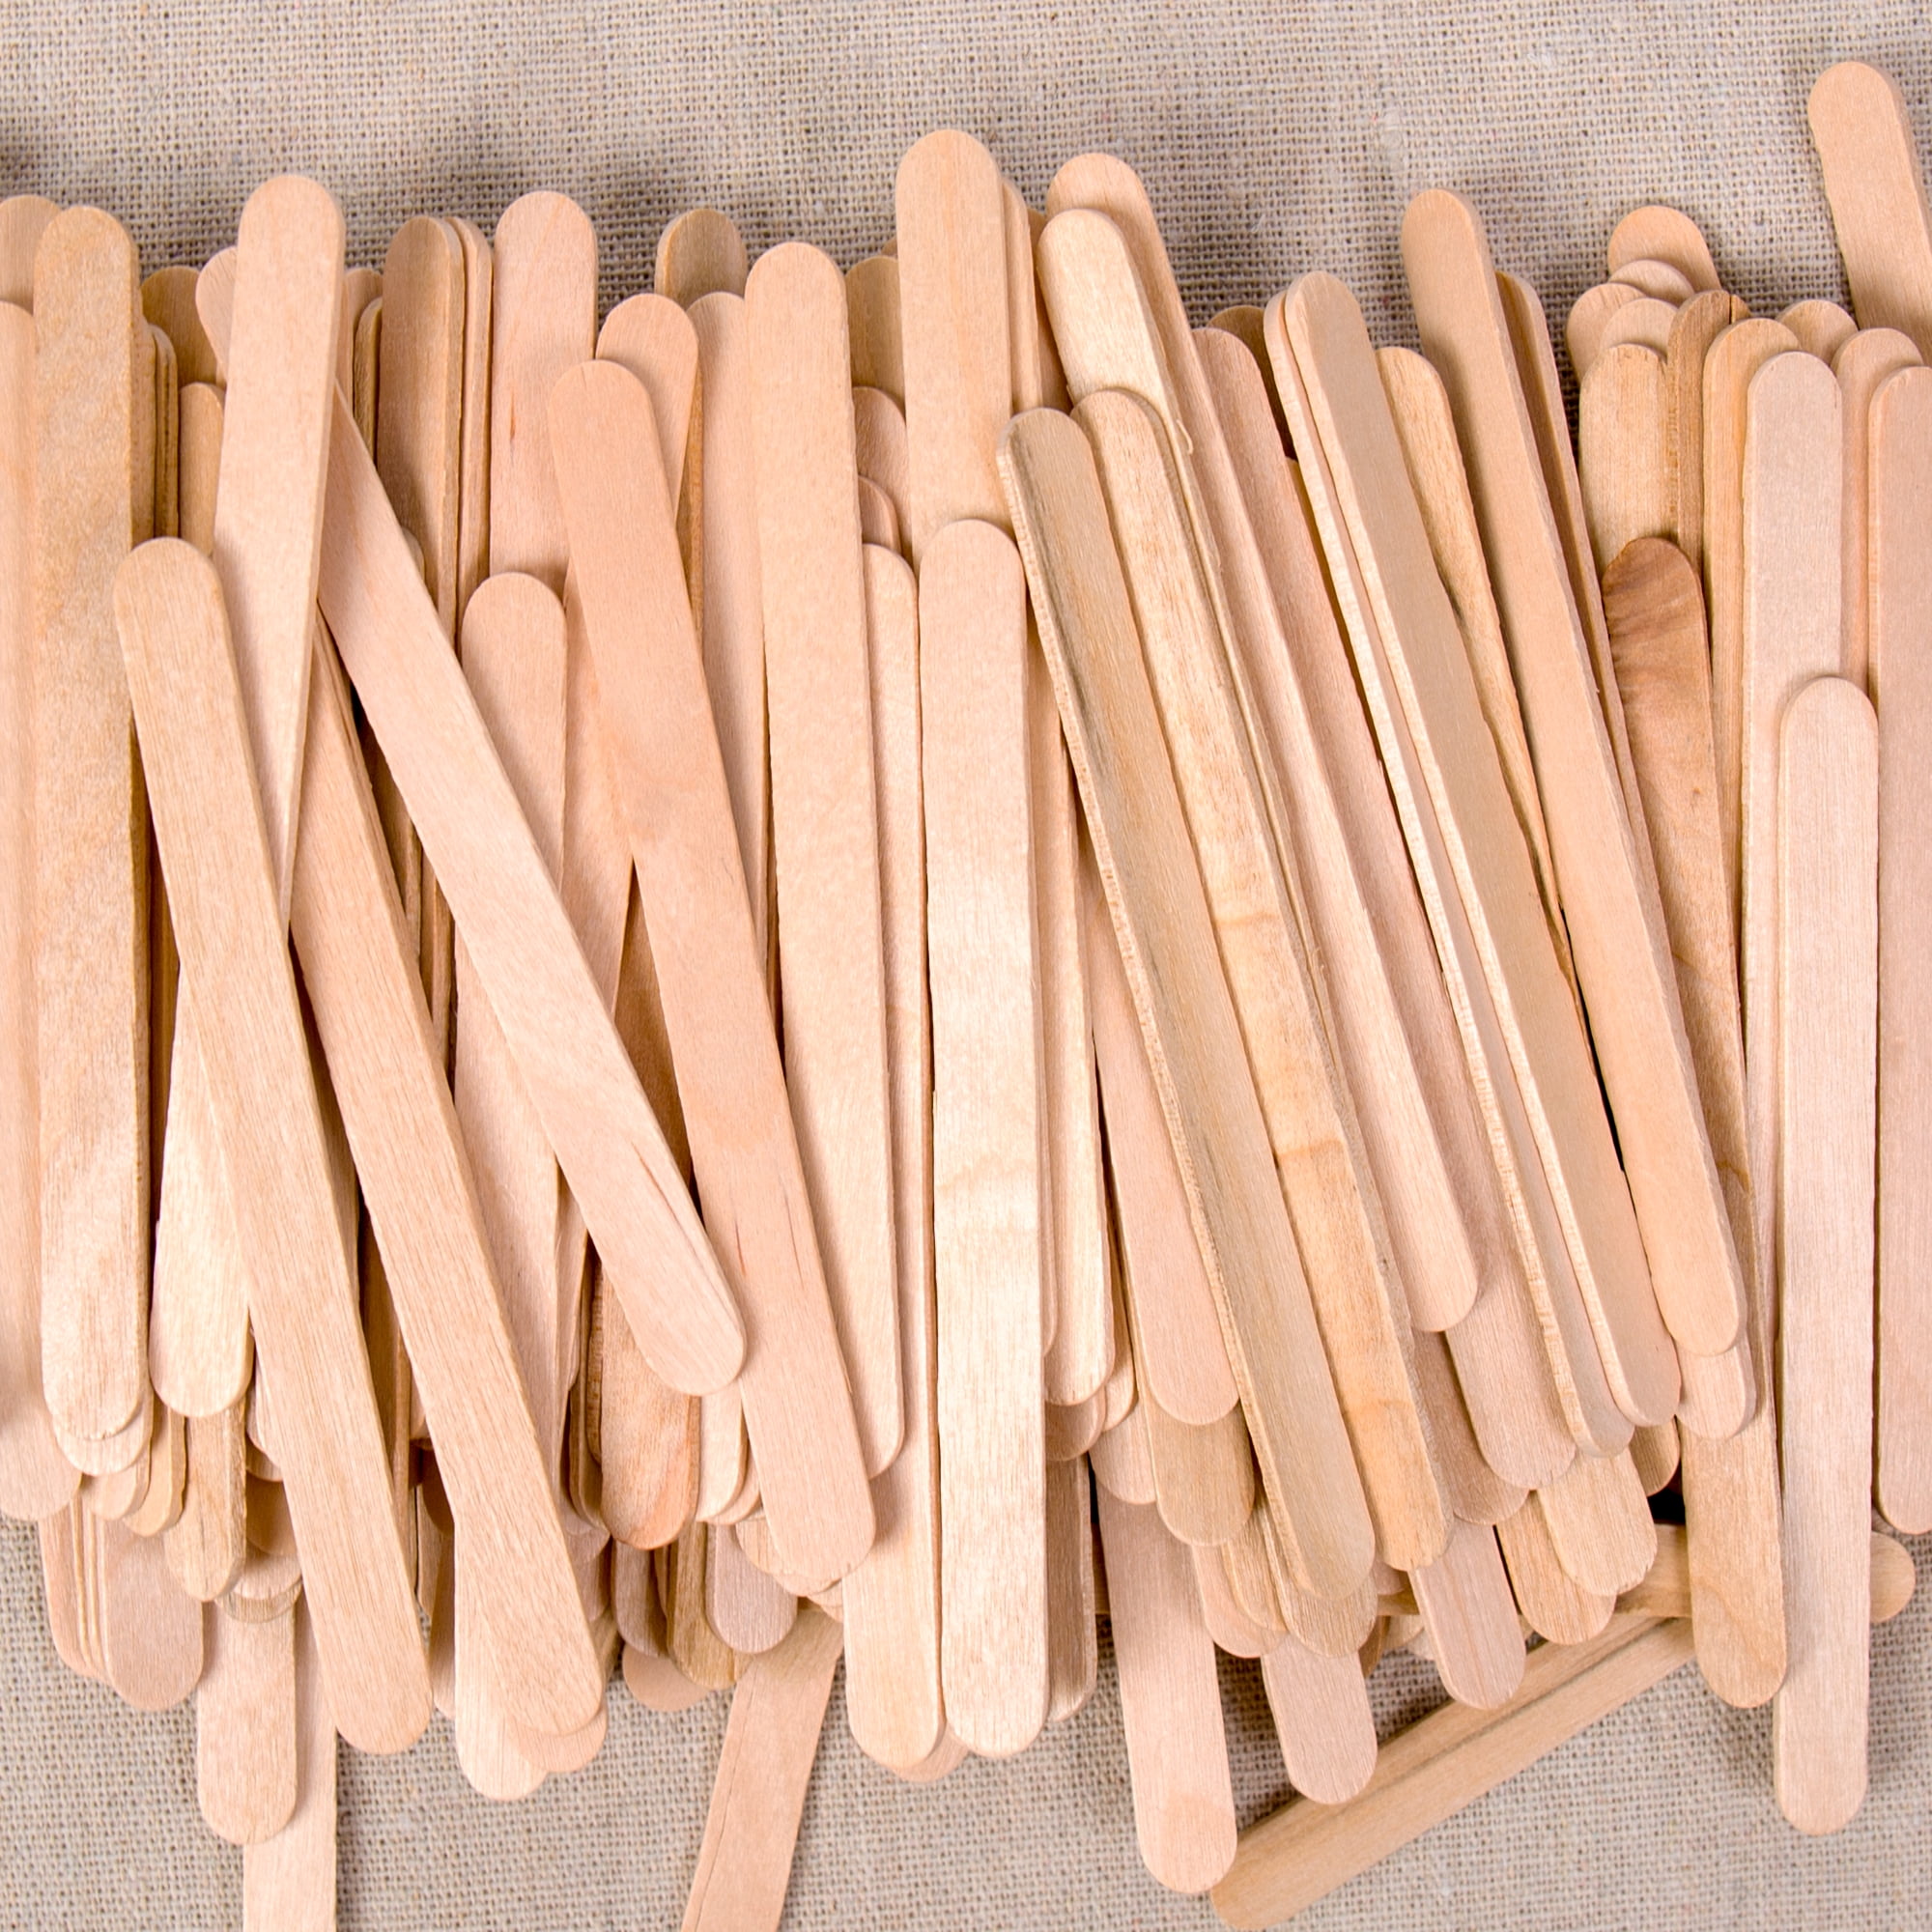 Woodpile Fun, Wooden Mini Craft Sticks, 2 1/2 inches, 150 Count